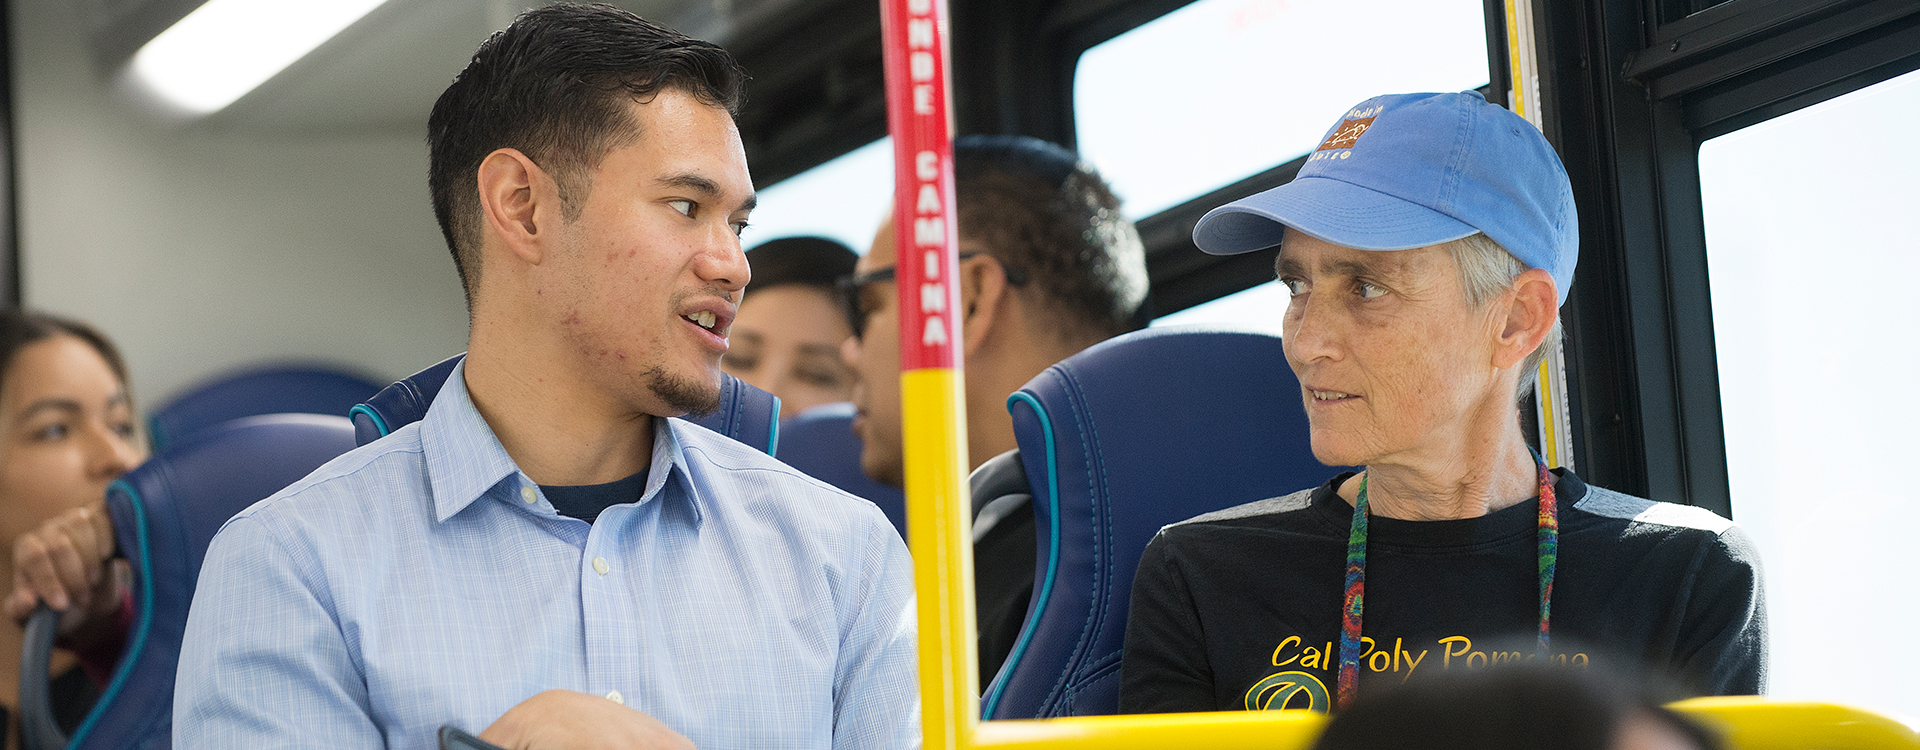 Two people speaking while sitting on a bus.